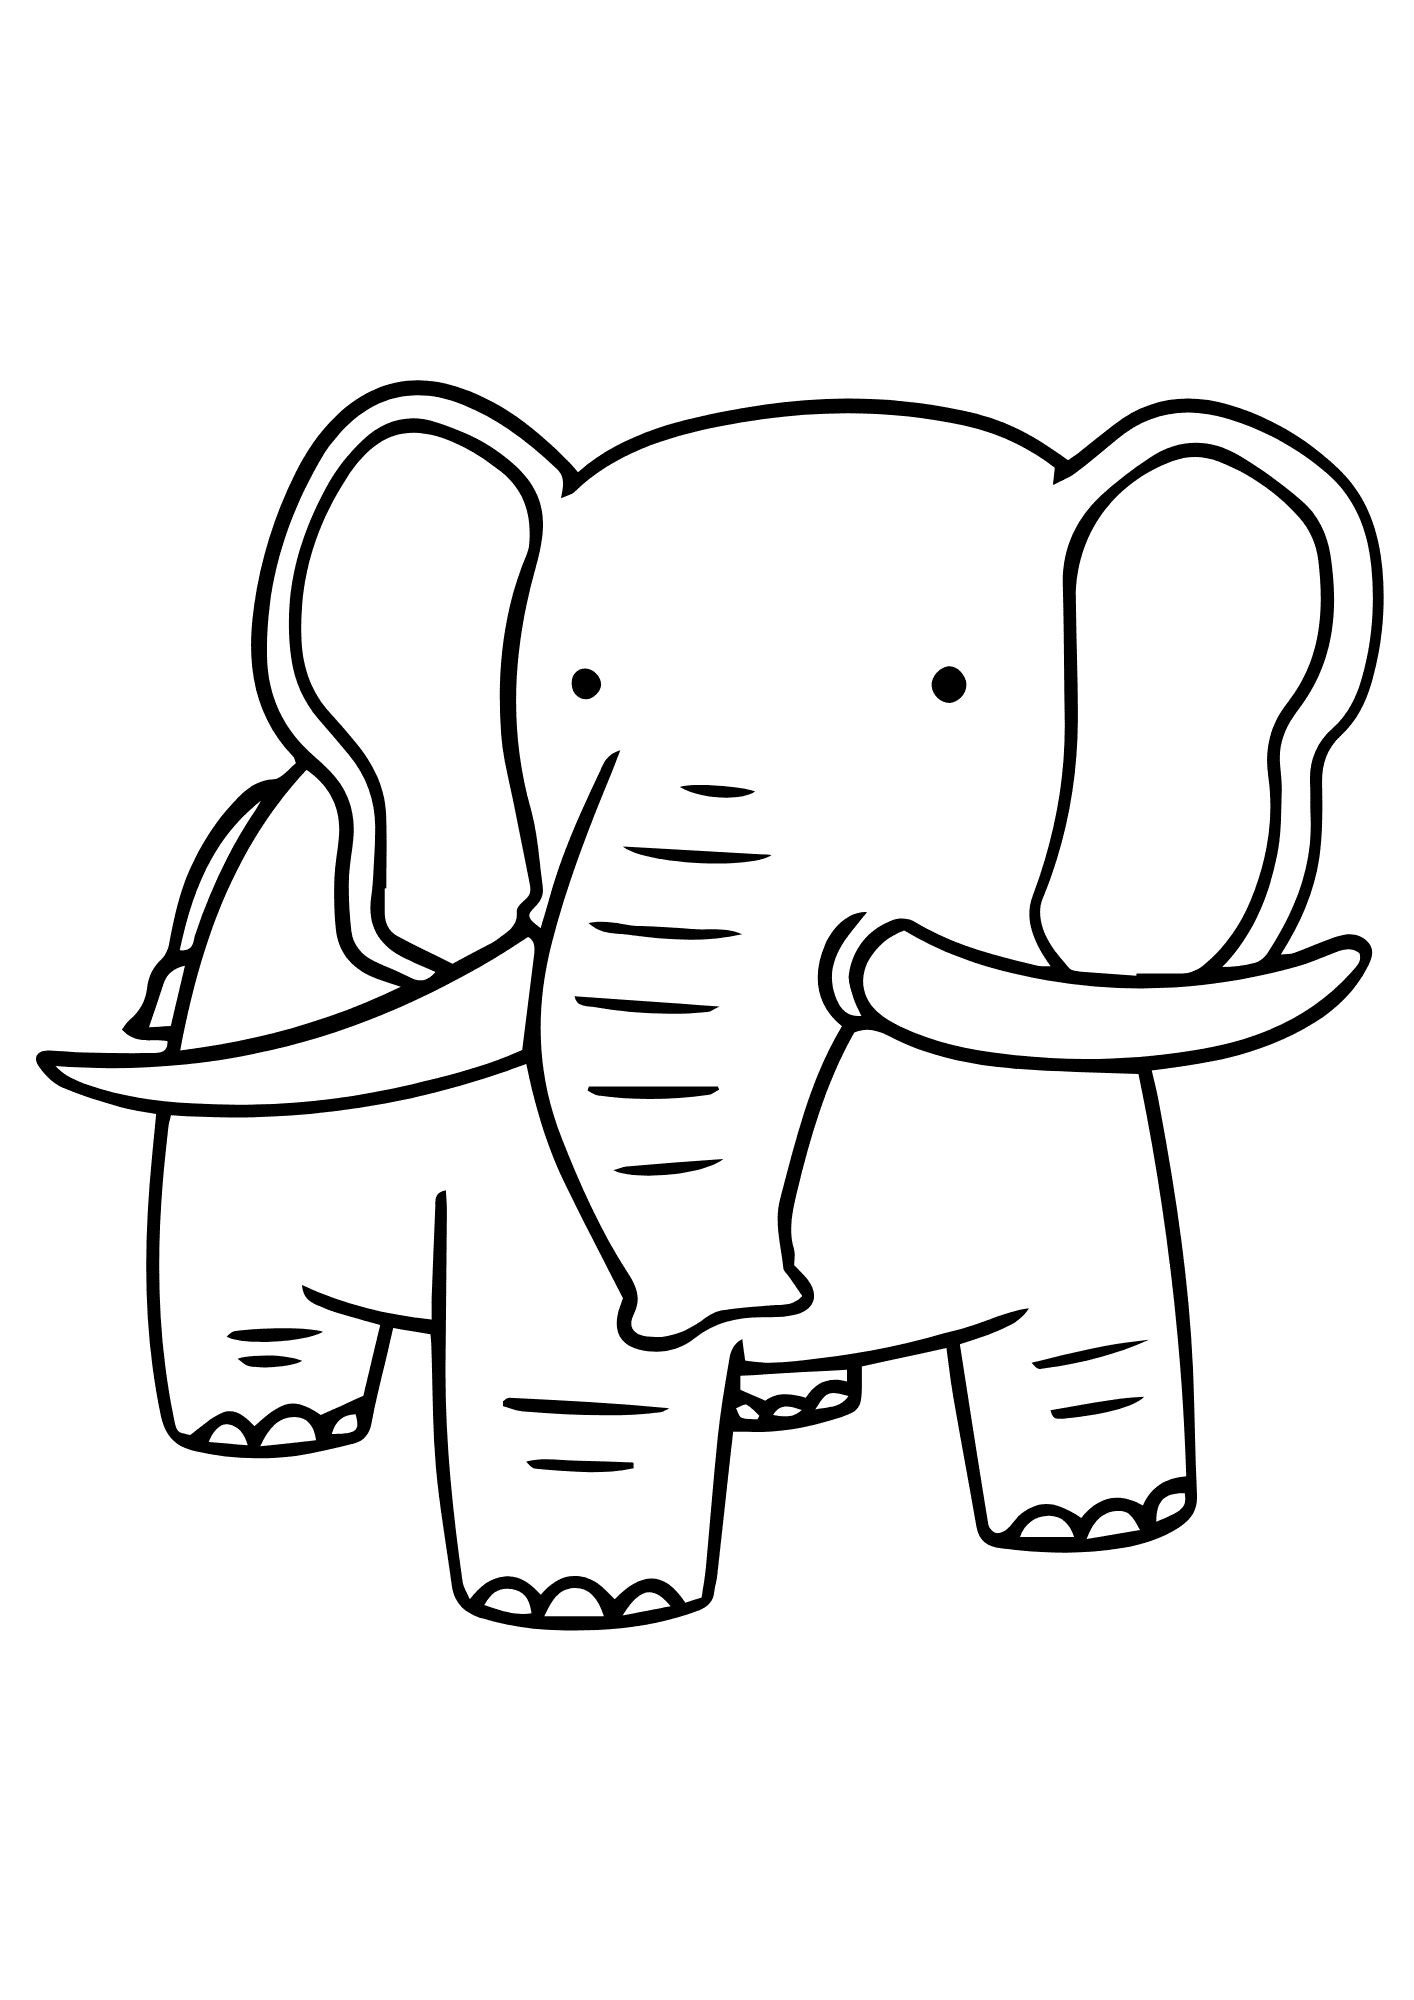 Elephant Mammals Coloring Page